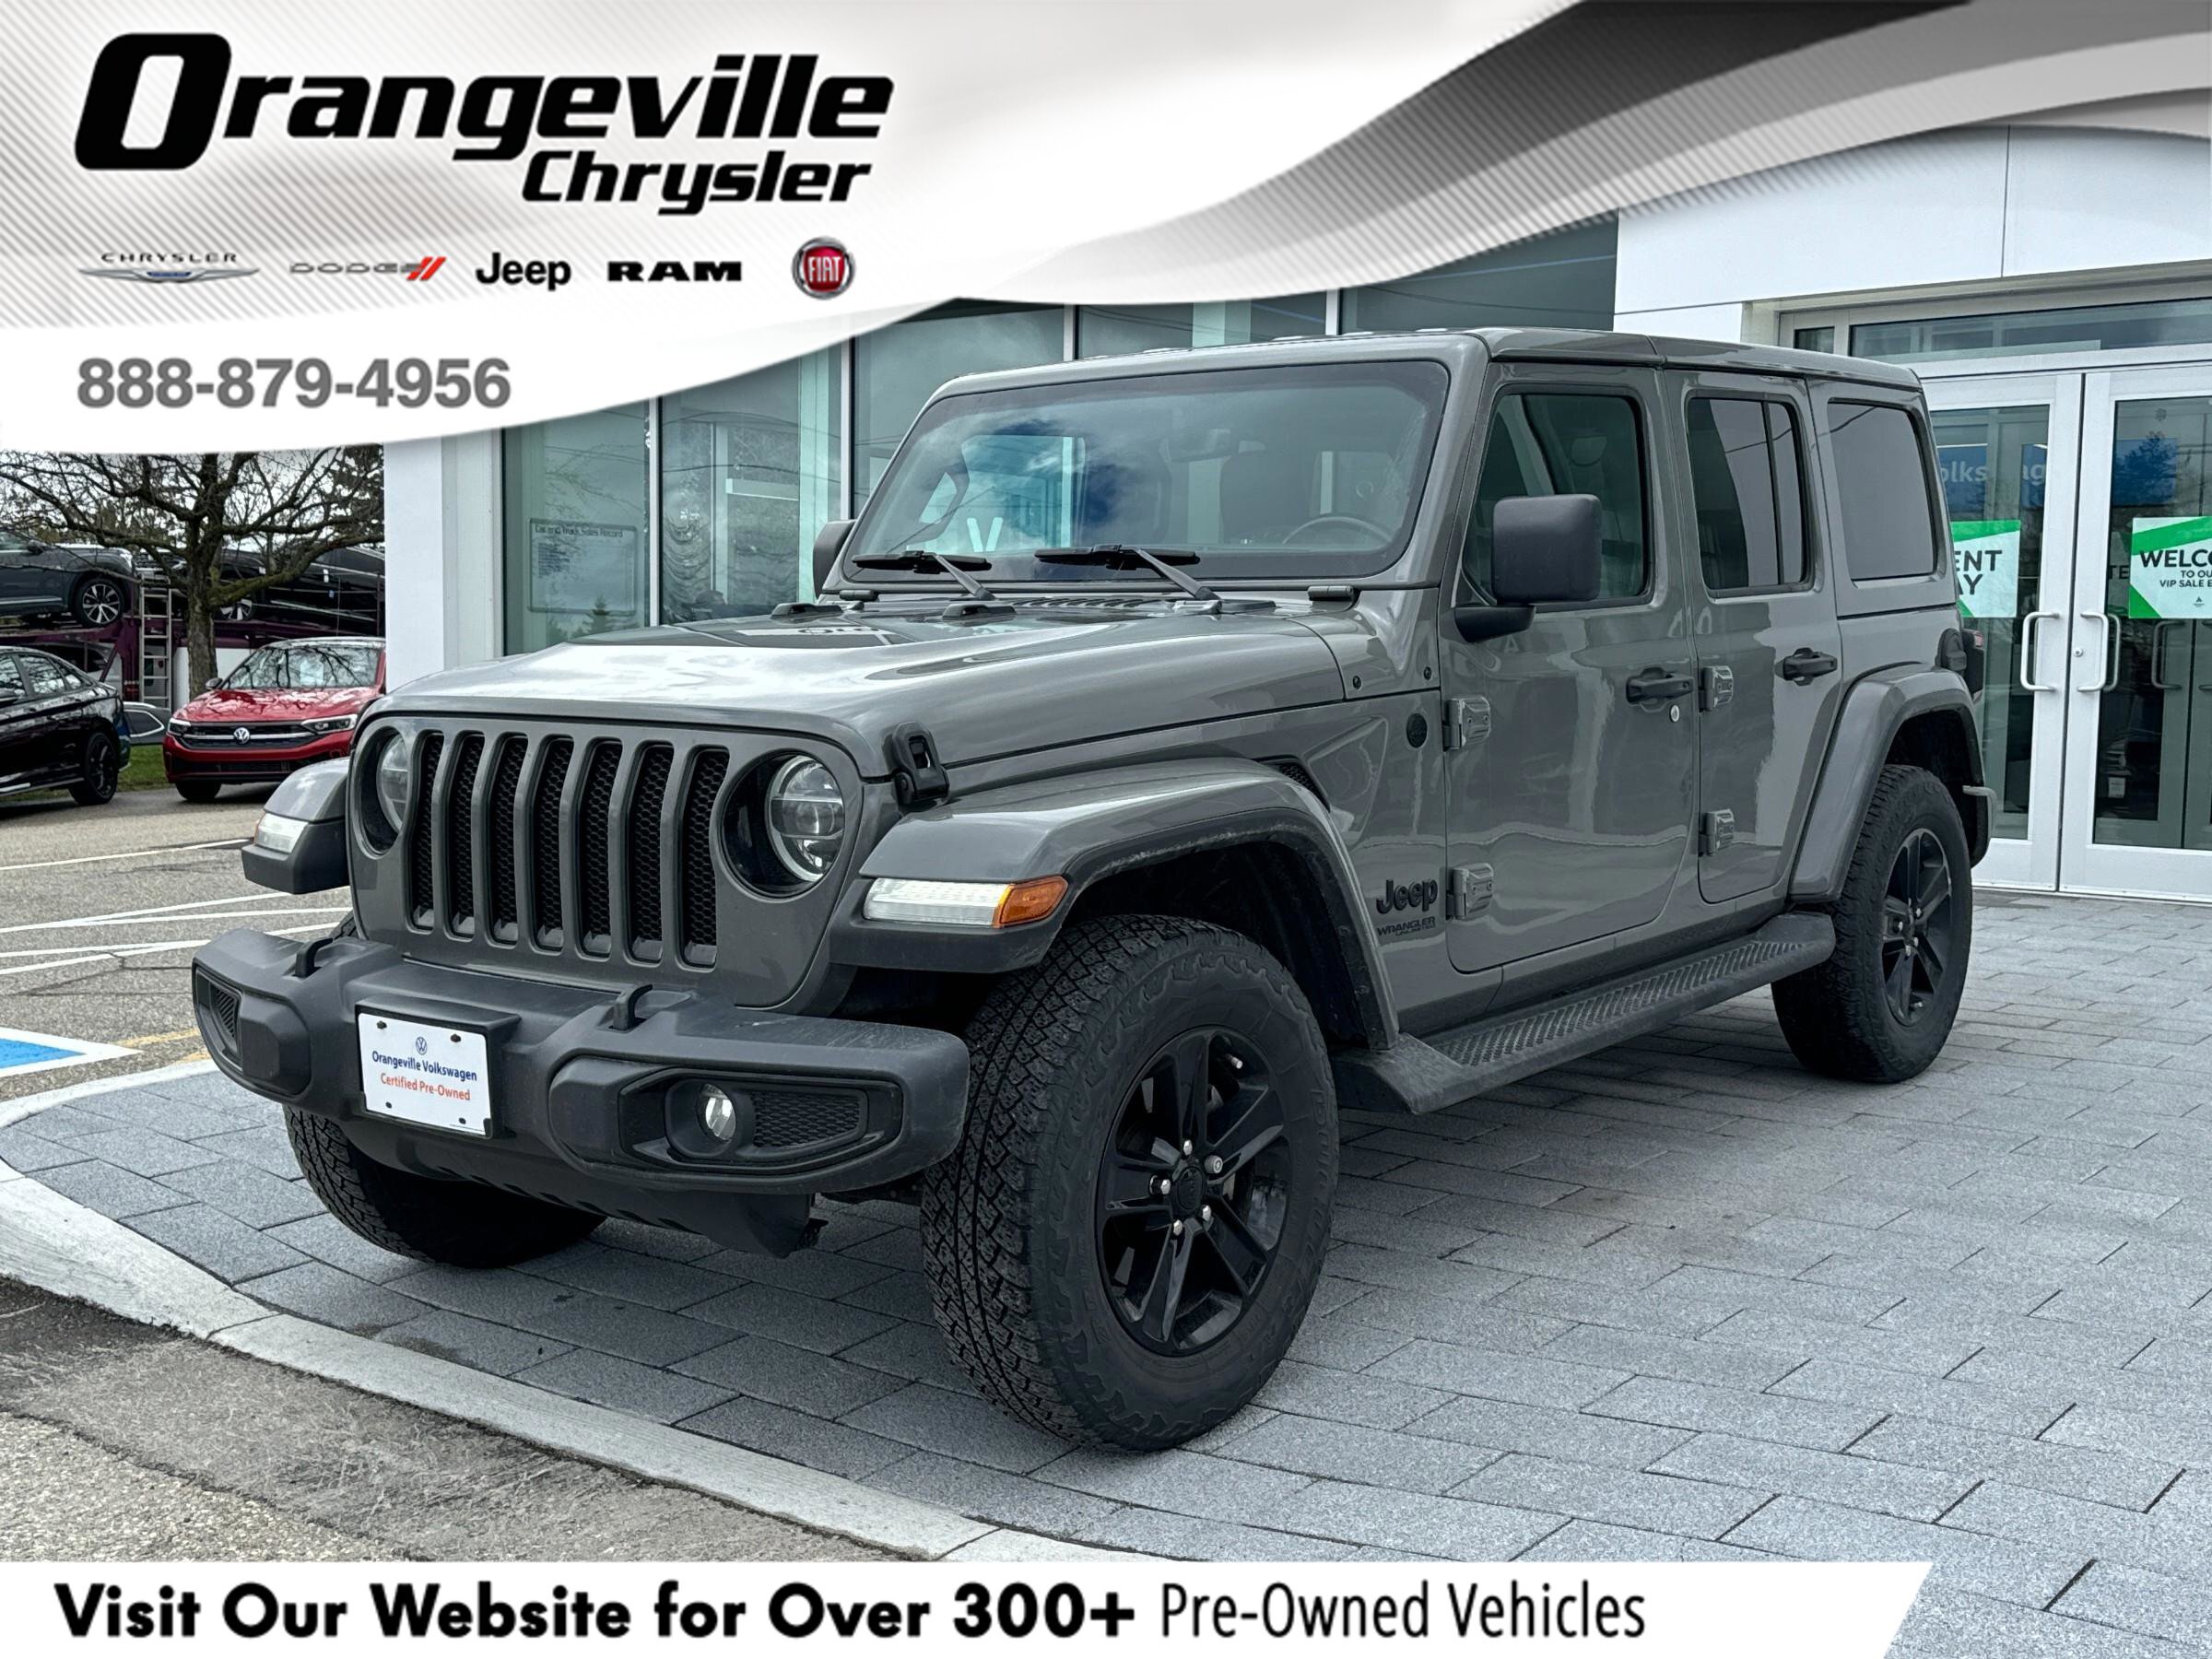 2021 Jeep Wrangler Unlimited AltitudeTWO ROOFS, 2.0L, ONE-OWNER, LEAT